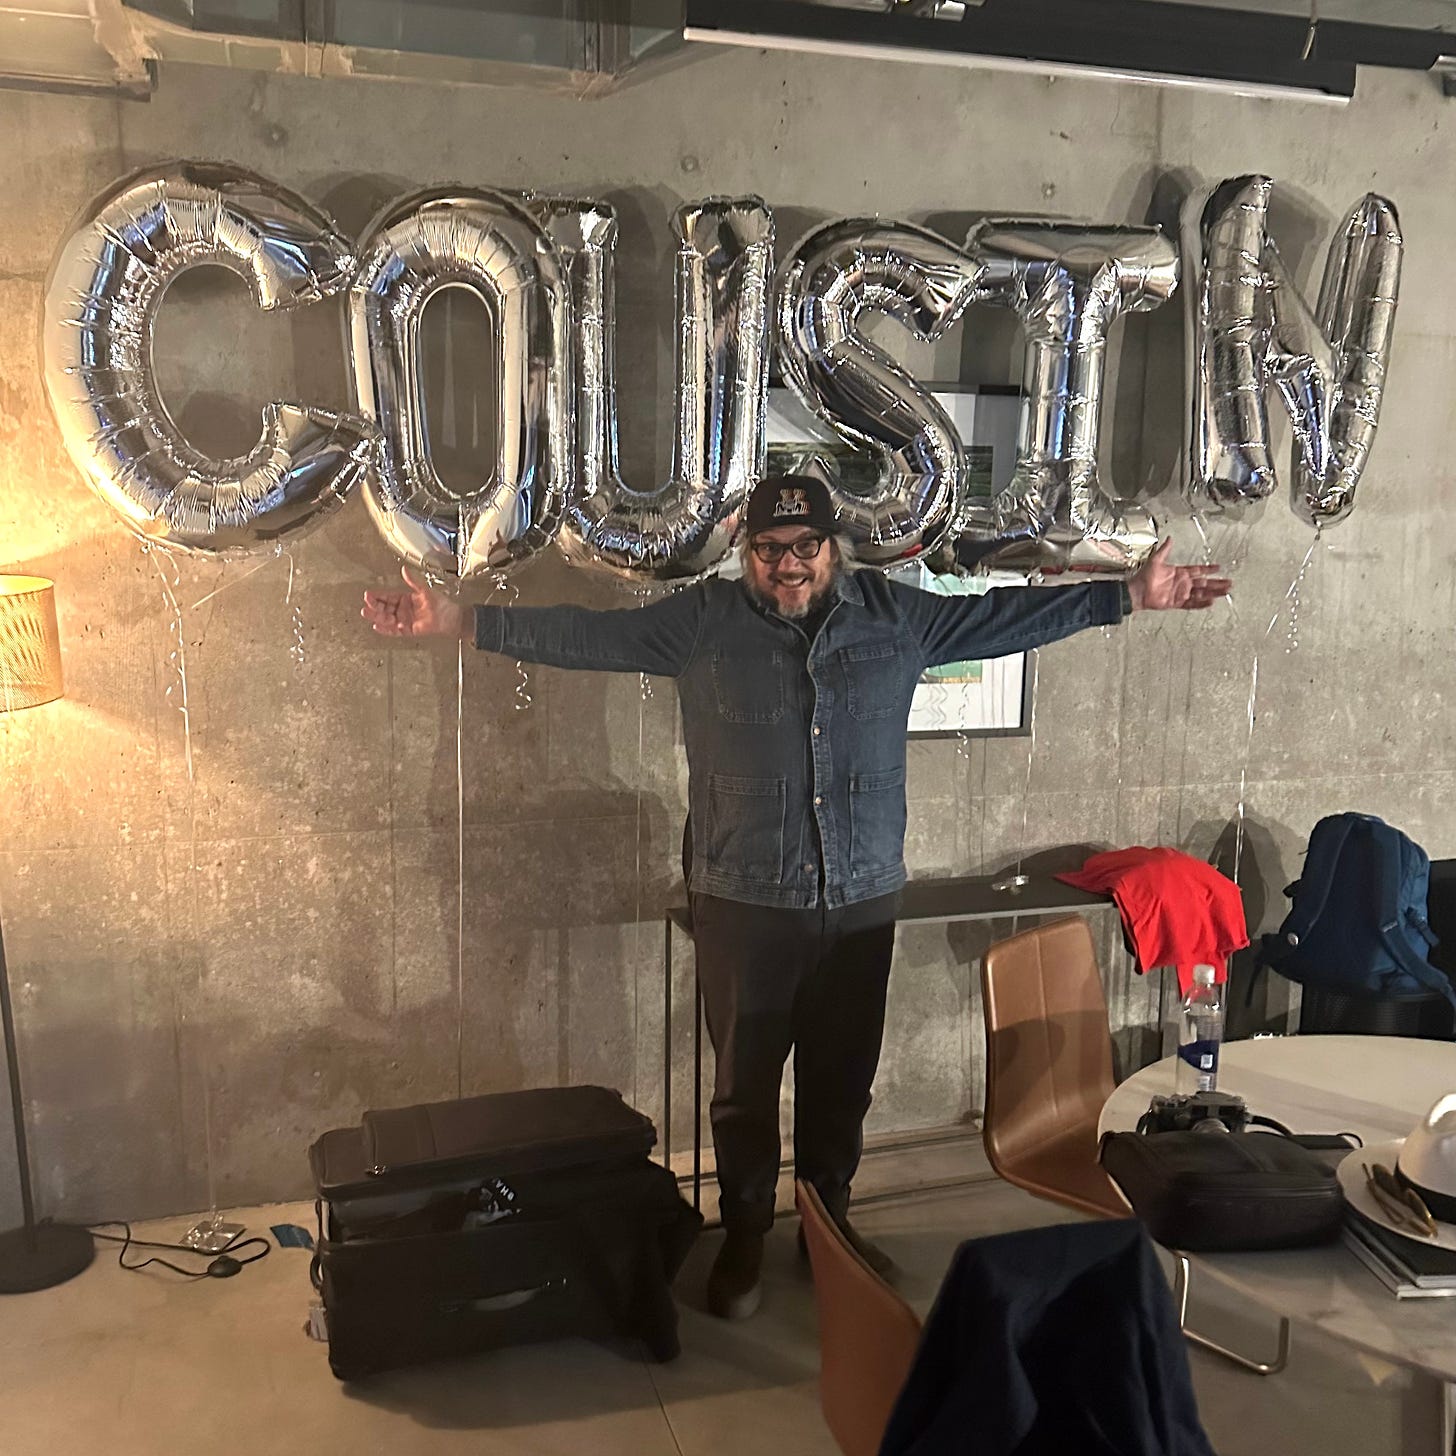 Jeff poses, arms outstretched, in front of silver balloons that spell COUSIN.